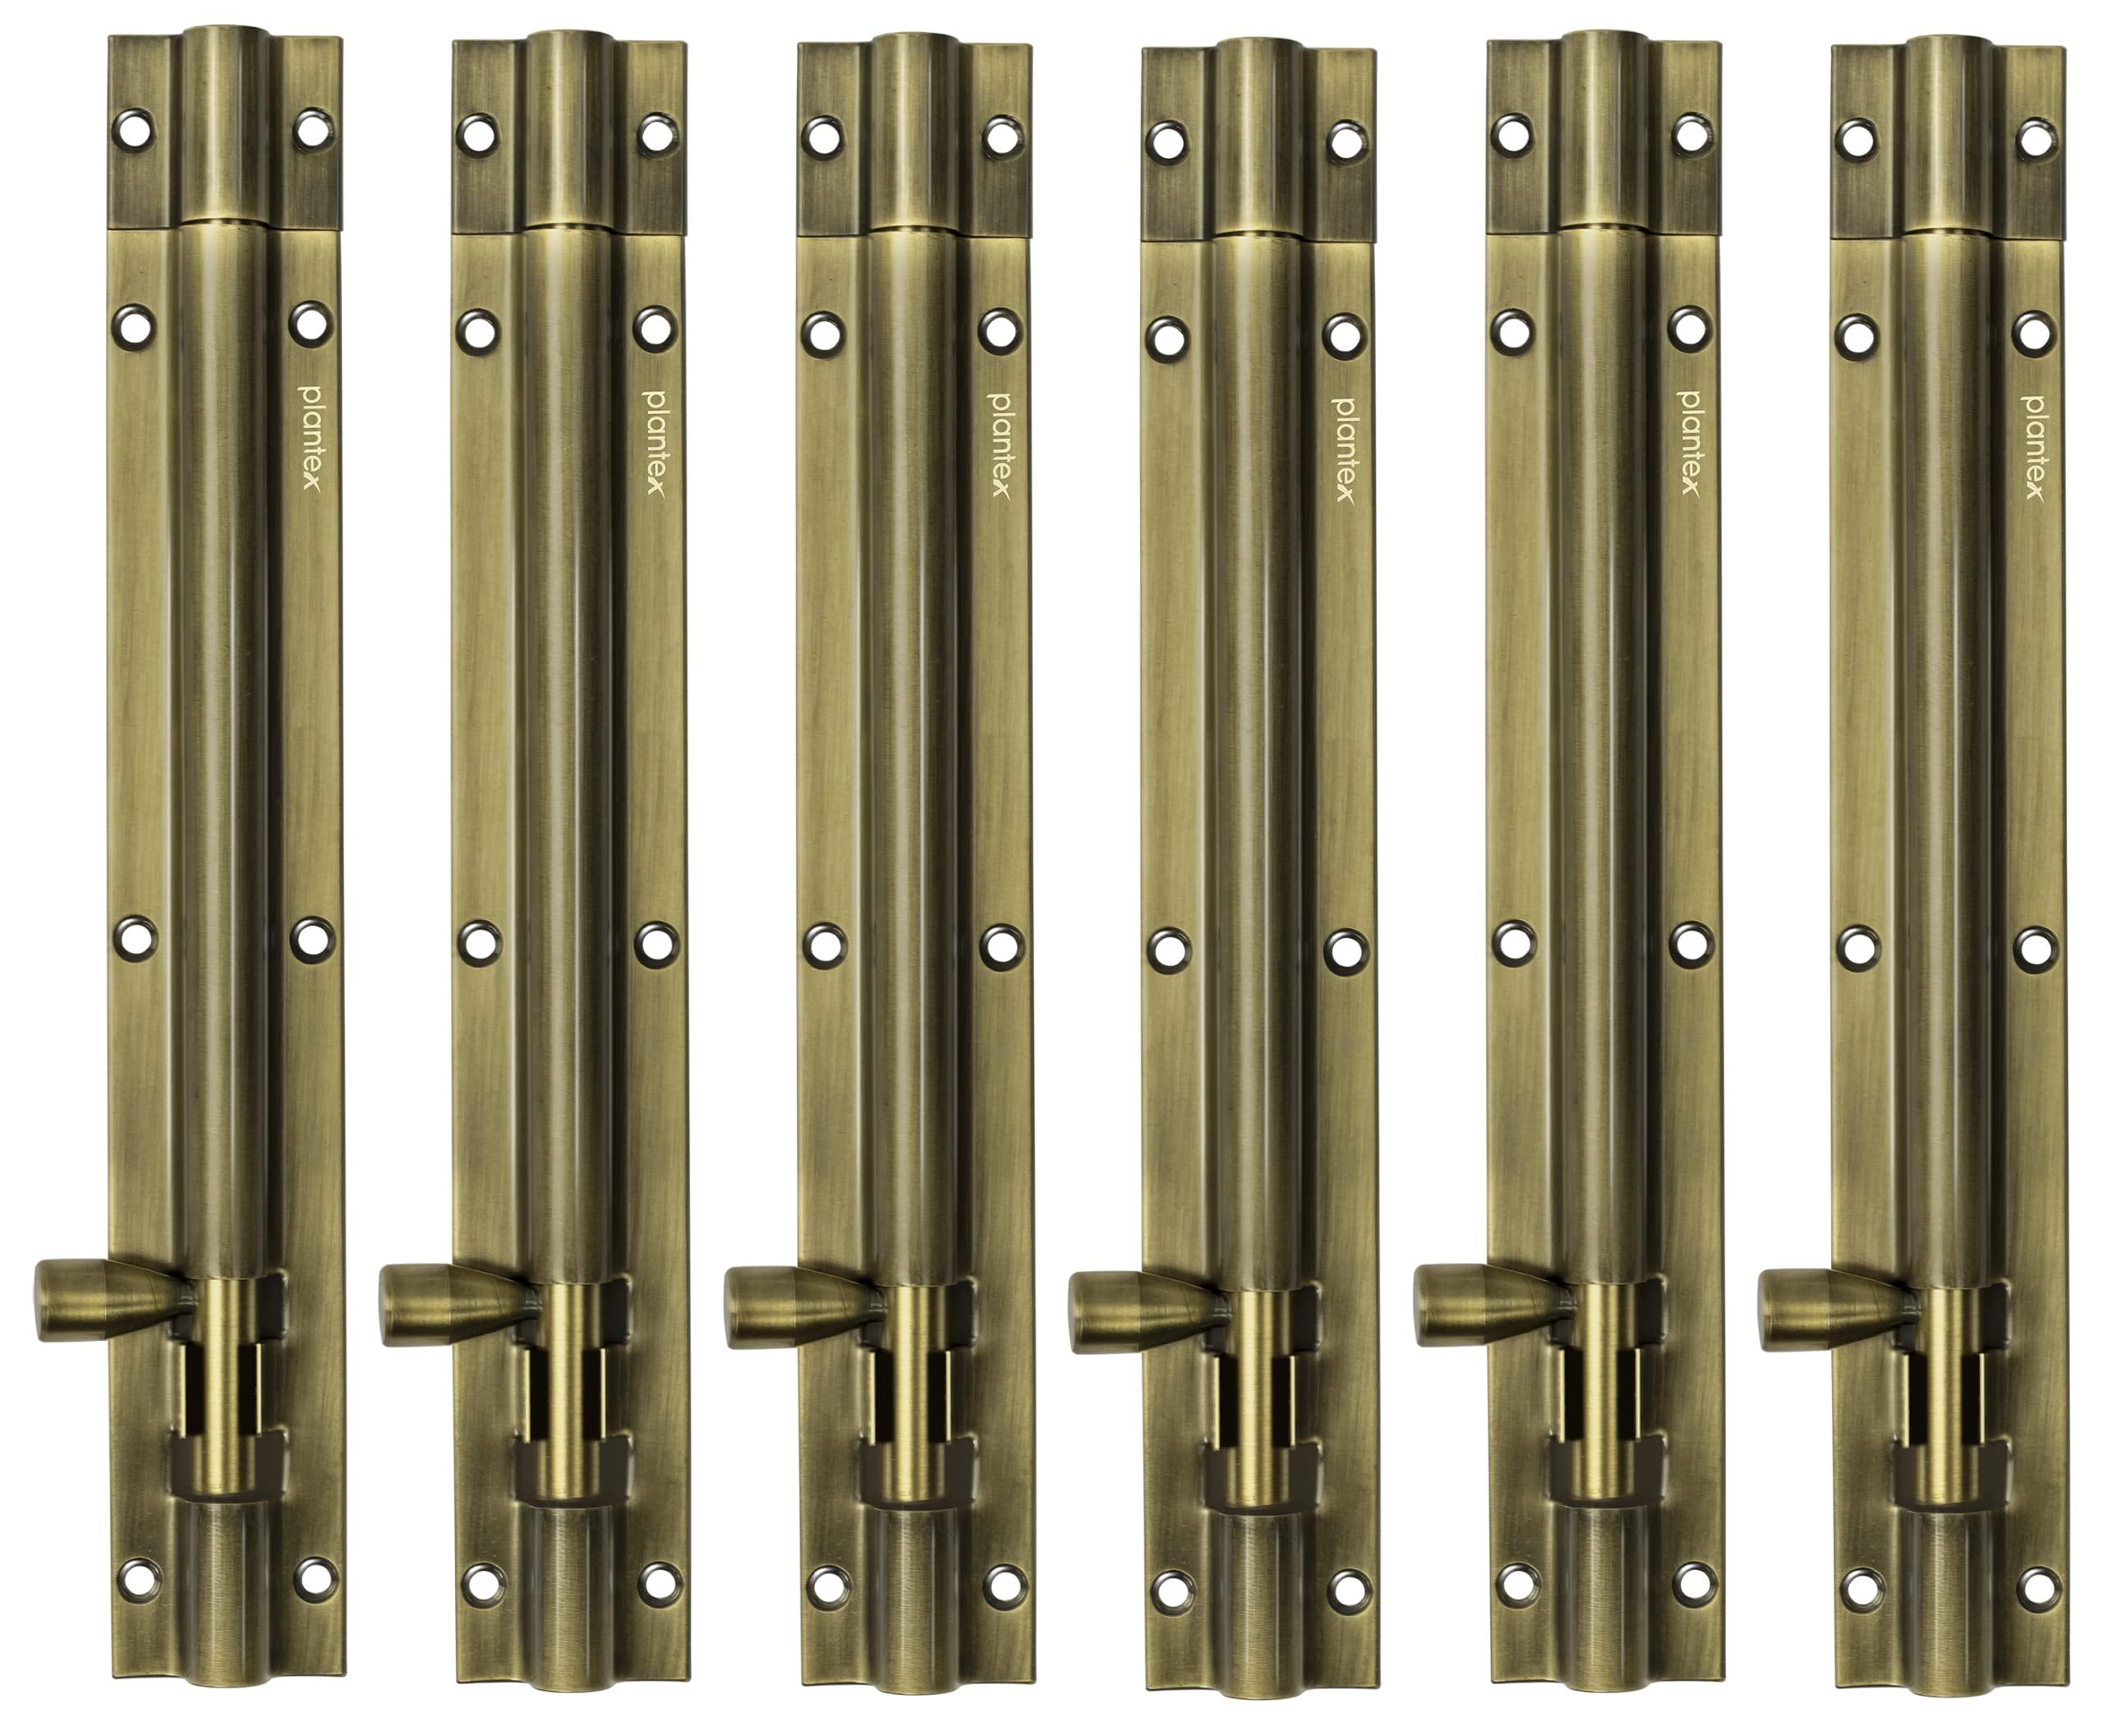 Plantex 8- inches Long Tower Bolt for Door/Windows/Wardrobe - Pack of 6 (Antique)